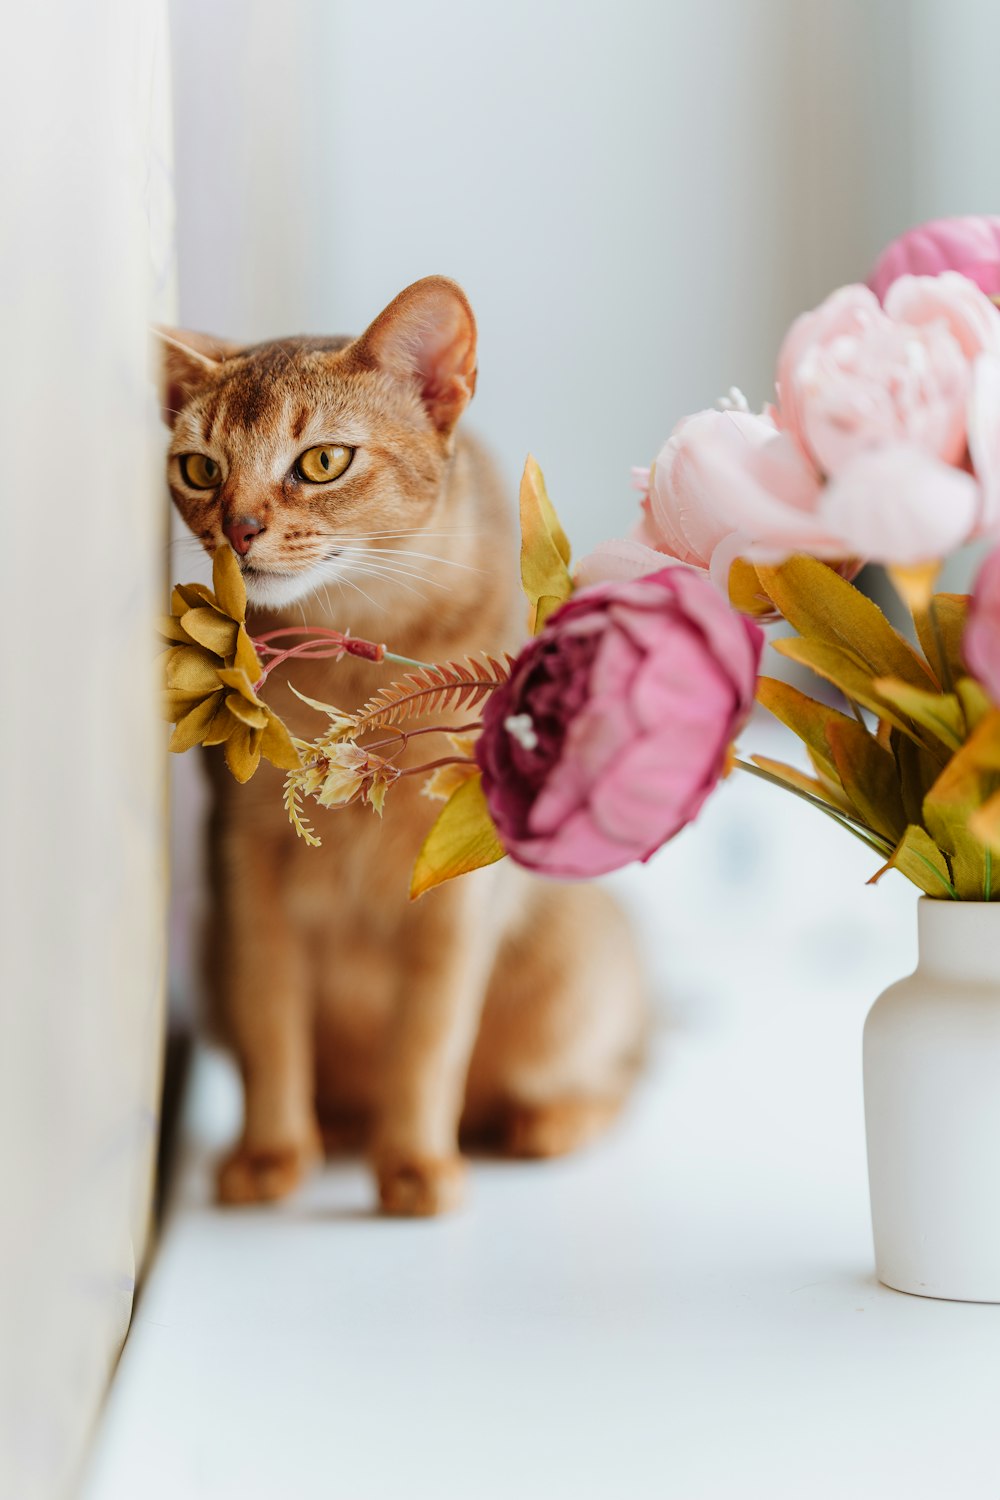 a cat standing next to a vase of flowers